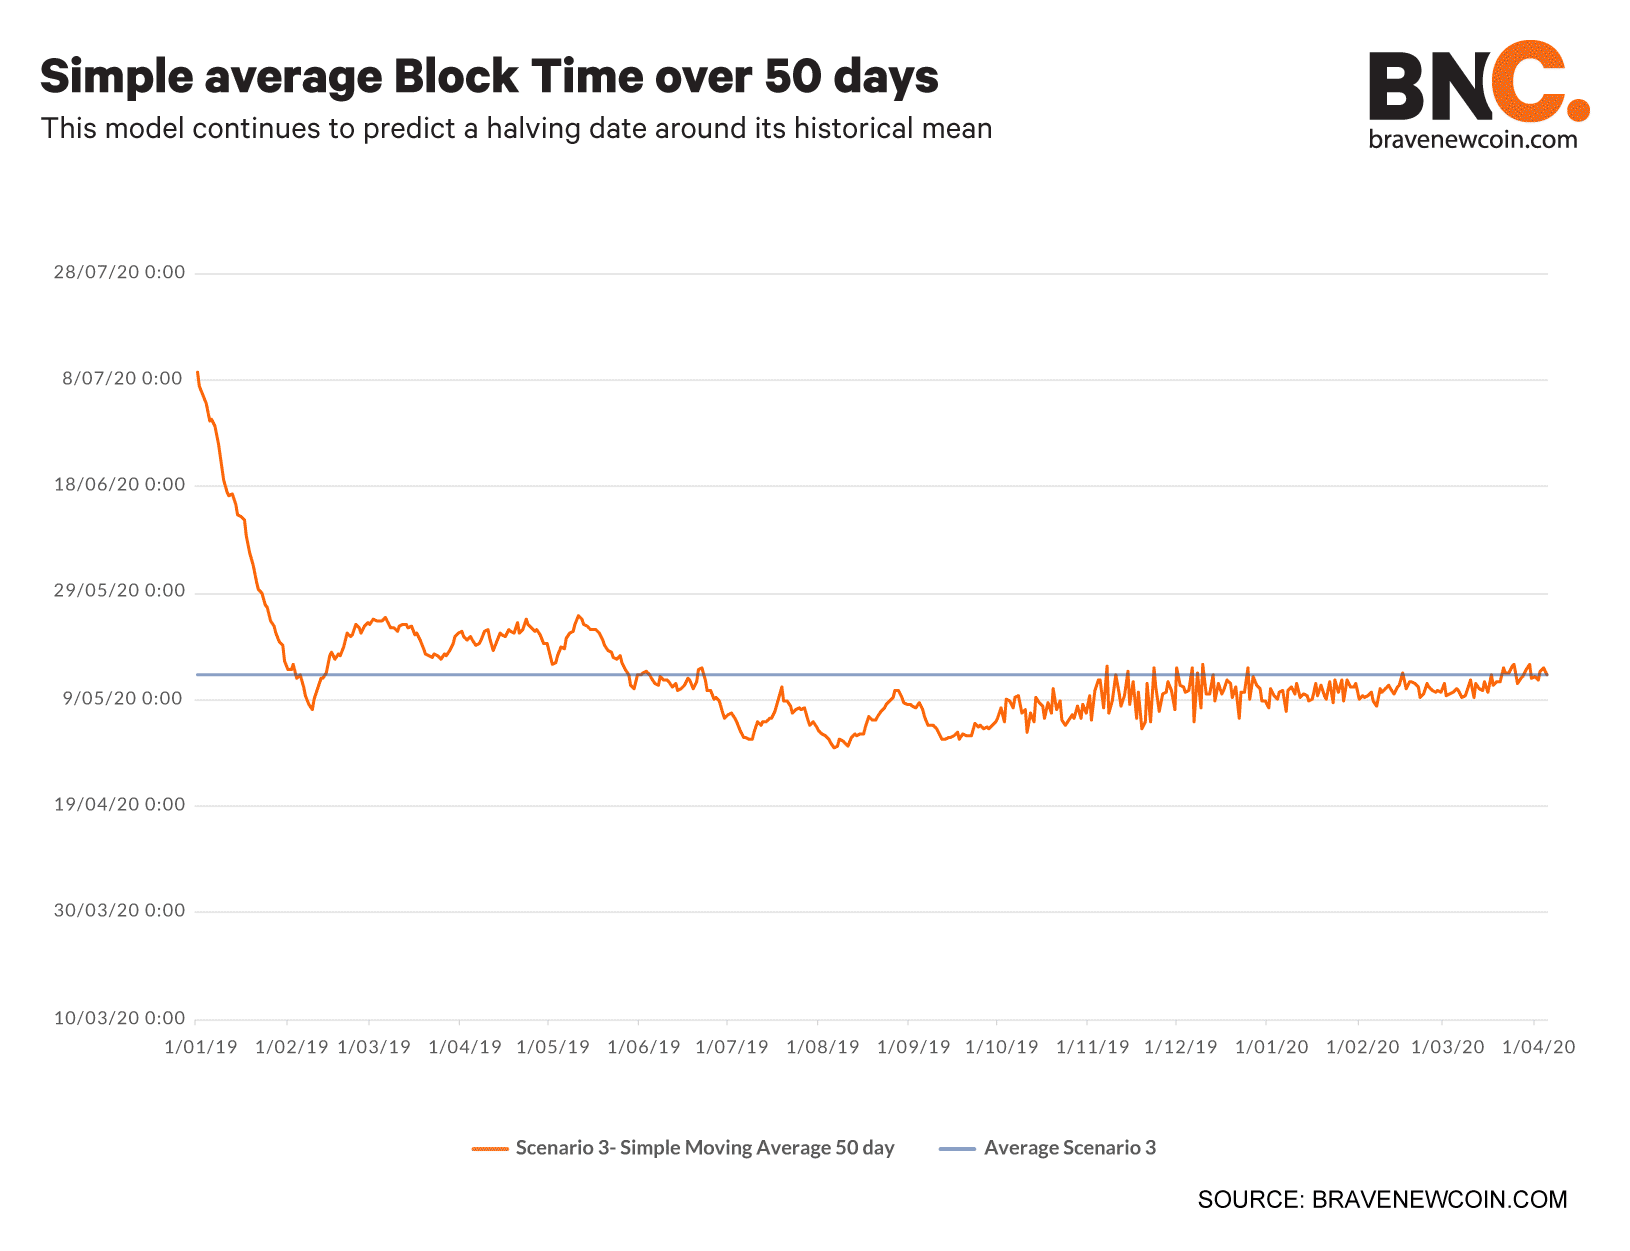 Simple-average-block-time-over-50-days (6)